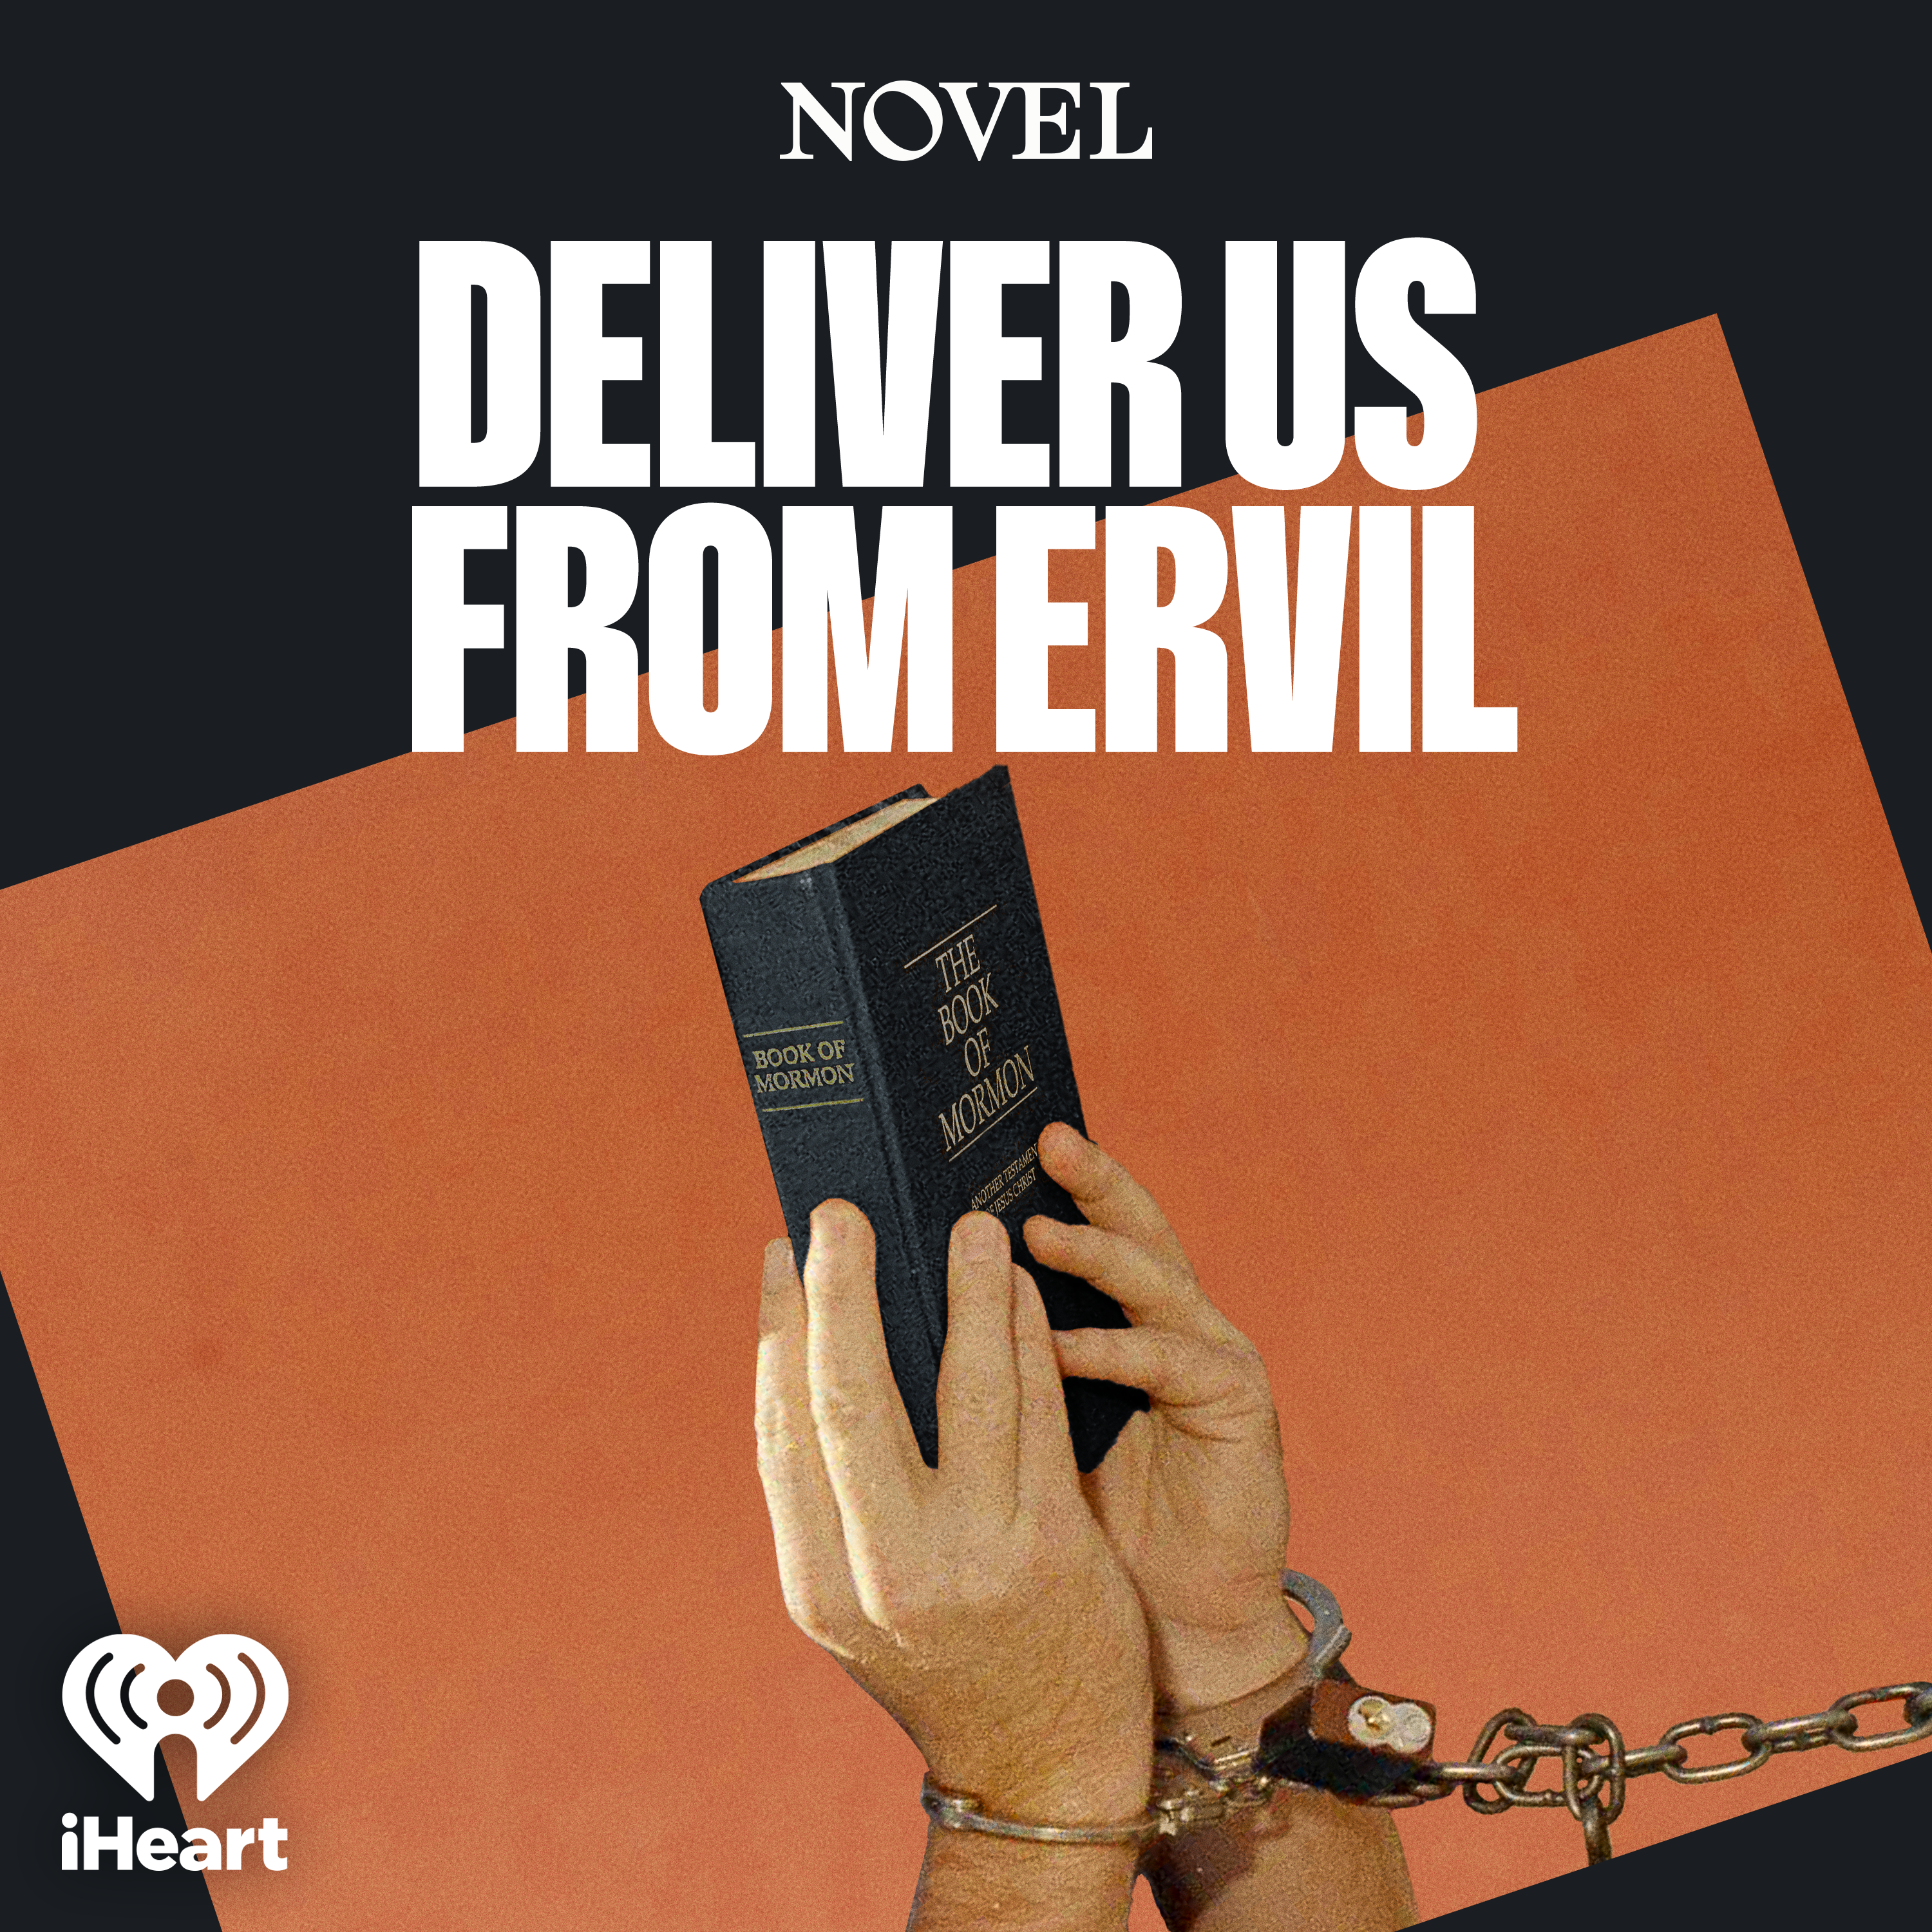 Introducing Deliver Us From Ervil